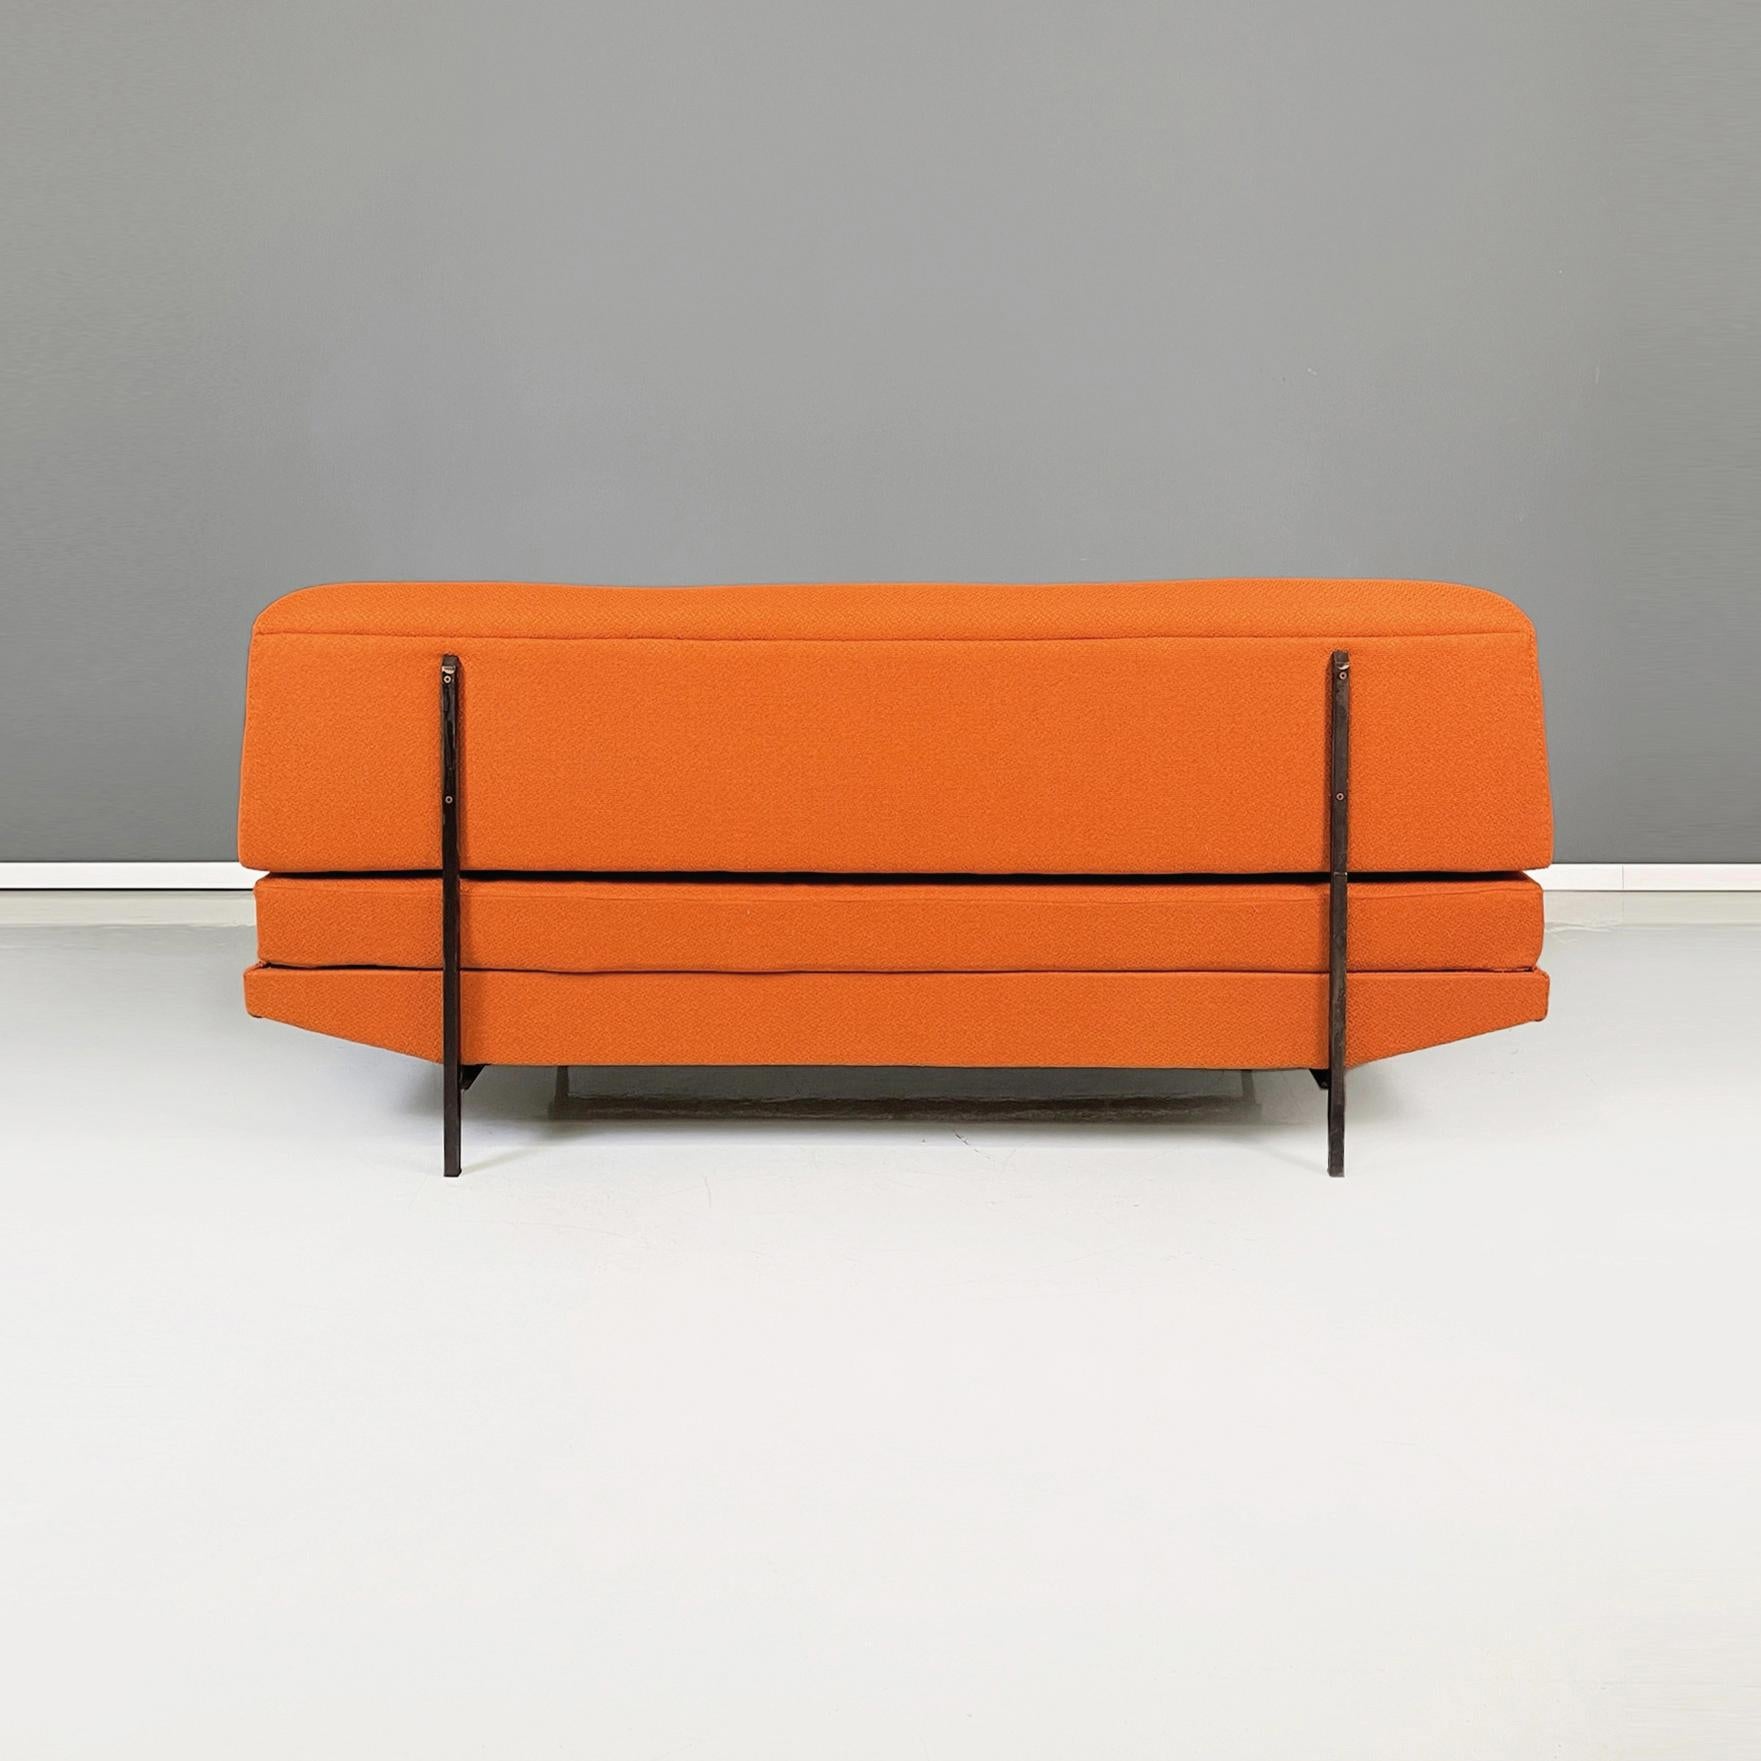 Italian Mid-Century Modern Sofa and Bed in orange Fabric and Black Metal, 1960s 4